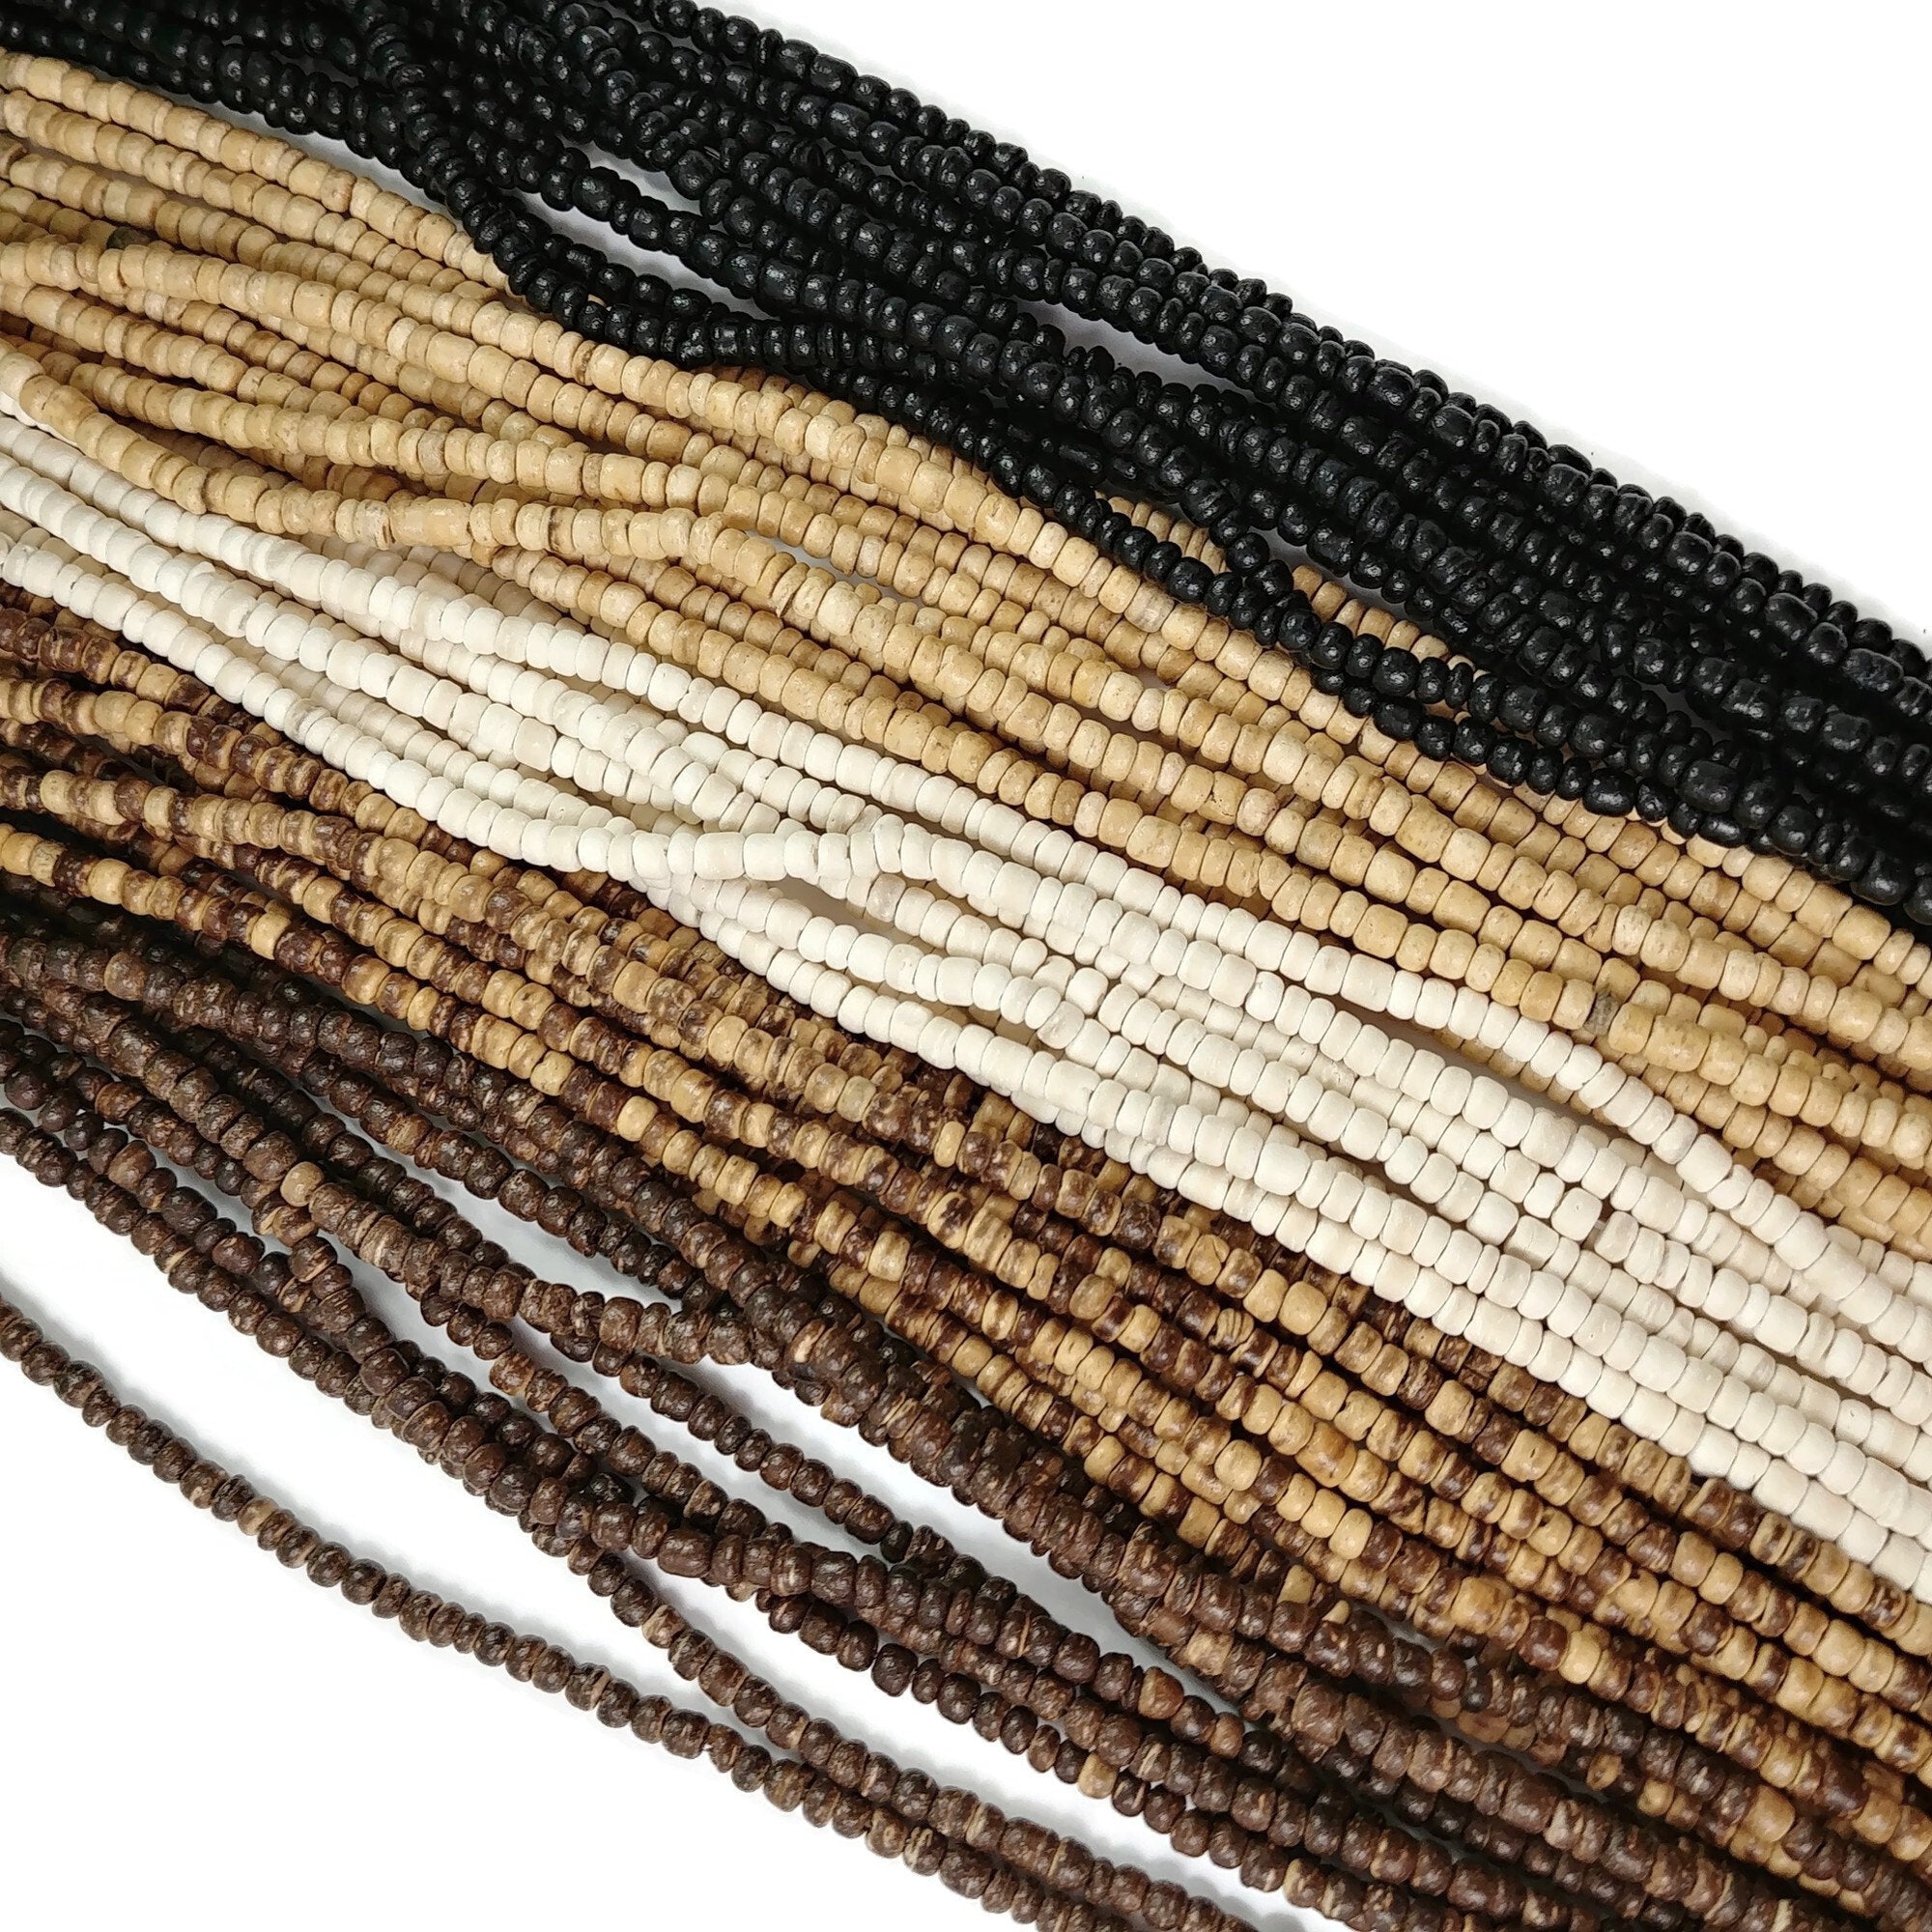 Tiny brown and beige coconut beads 2-3mm, Natural wooden seed beads, Jewelry making bracelet beads